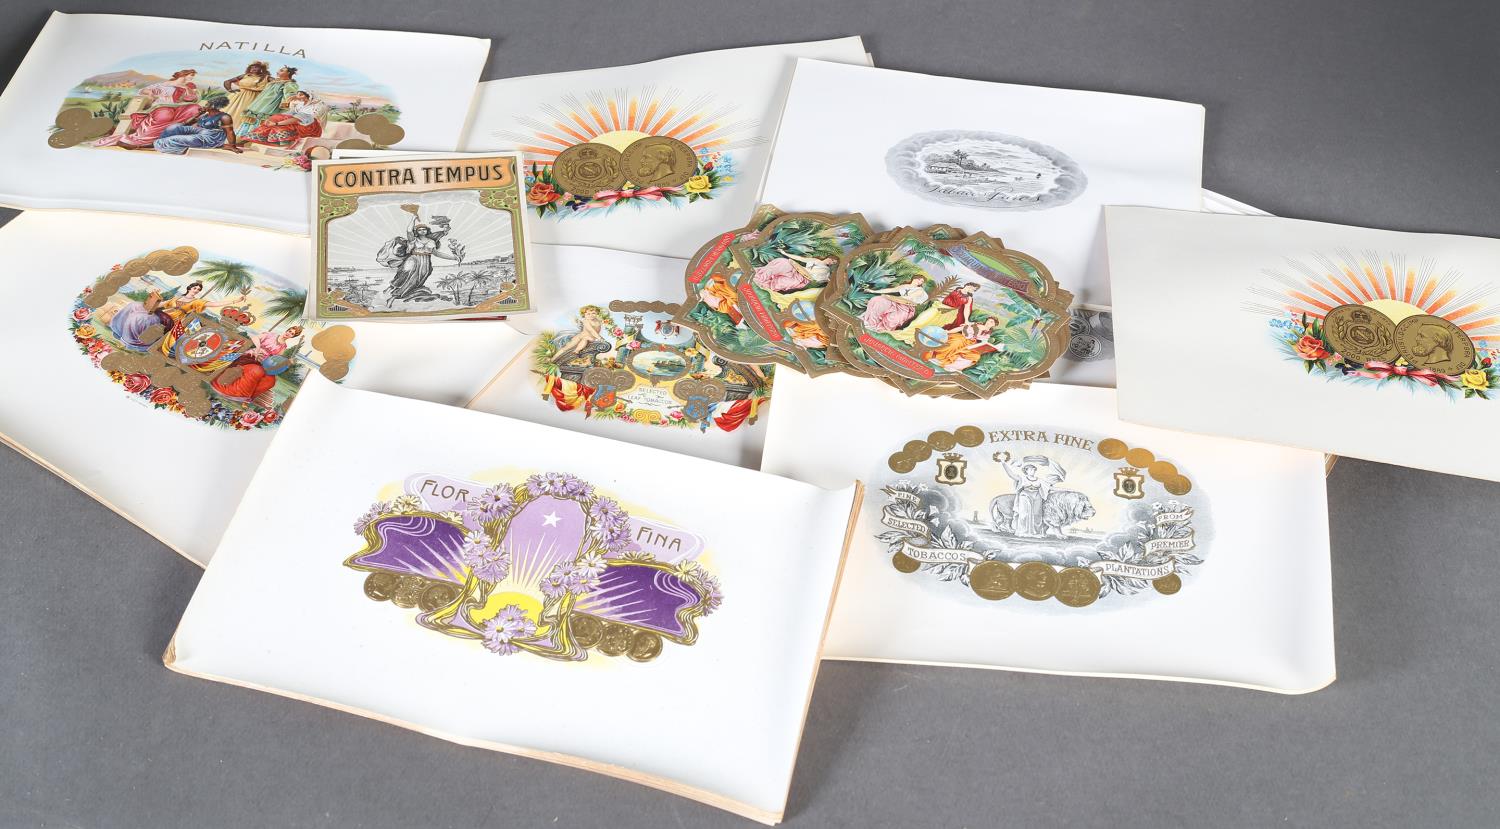 A large quantity of vintage chromolithographic and gilt printed cigar box labels, some with embossed